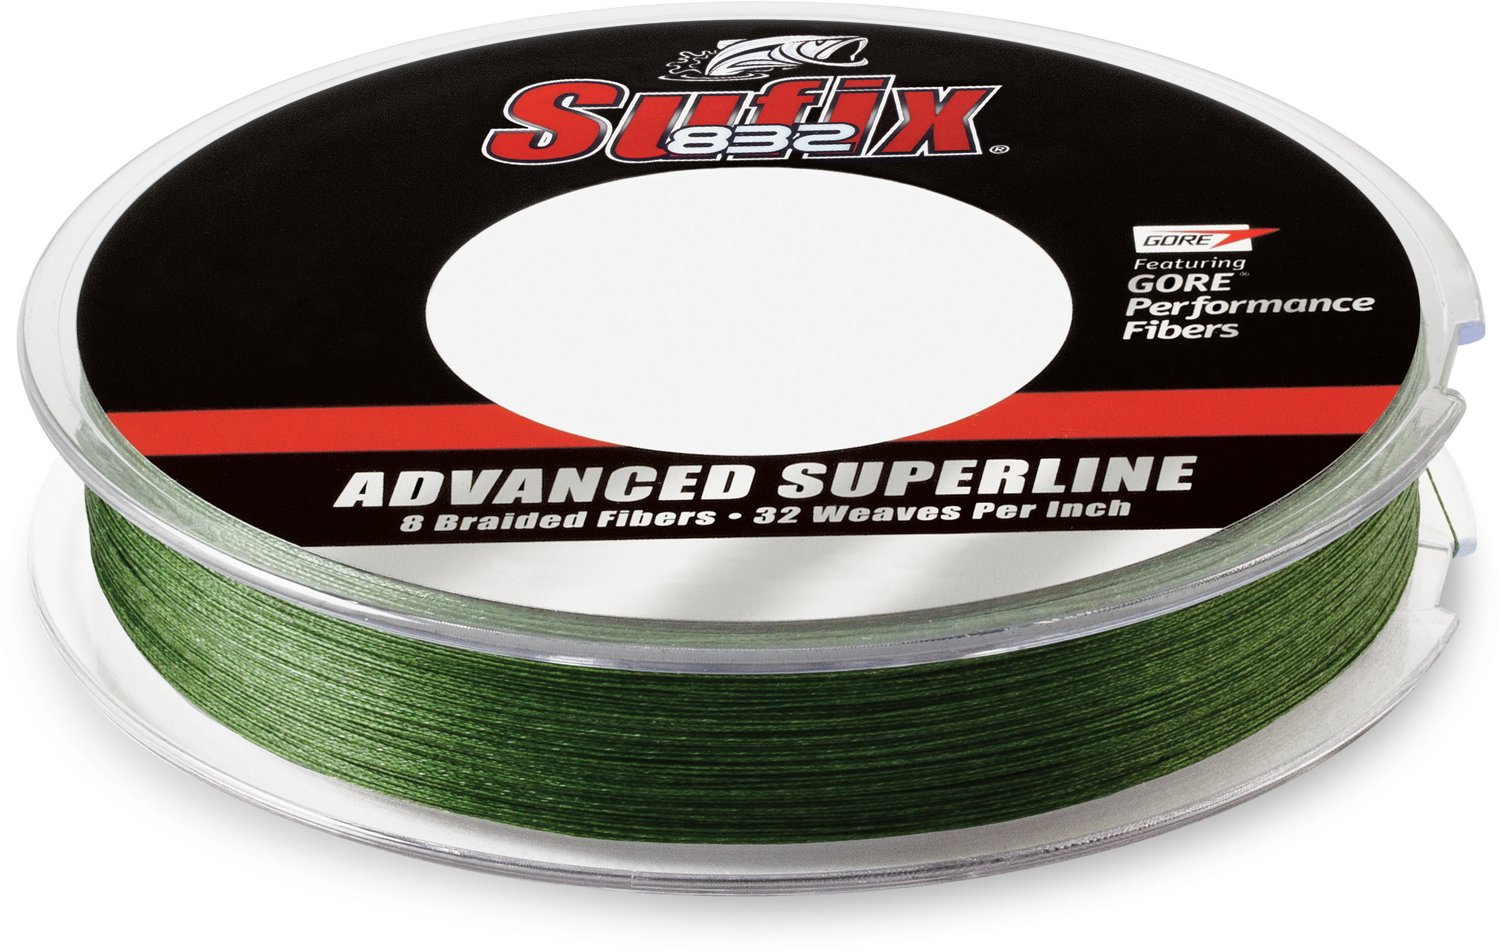 Power Pro Microfilament 15 Pound Braided Fishing Line : : Sports,  Fitness & Outdoors